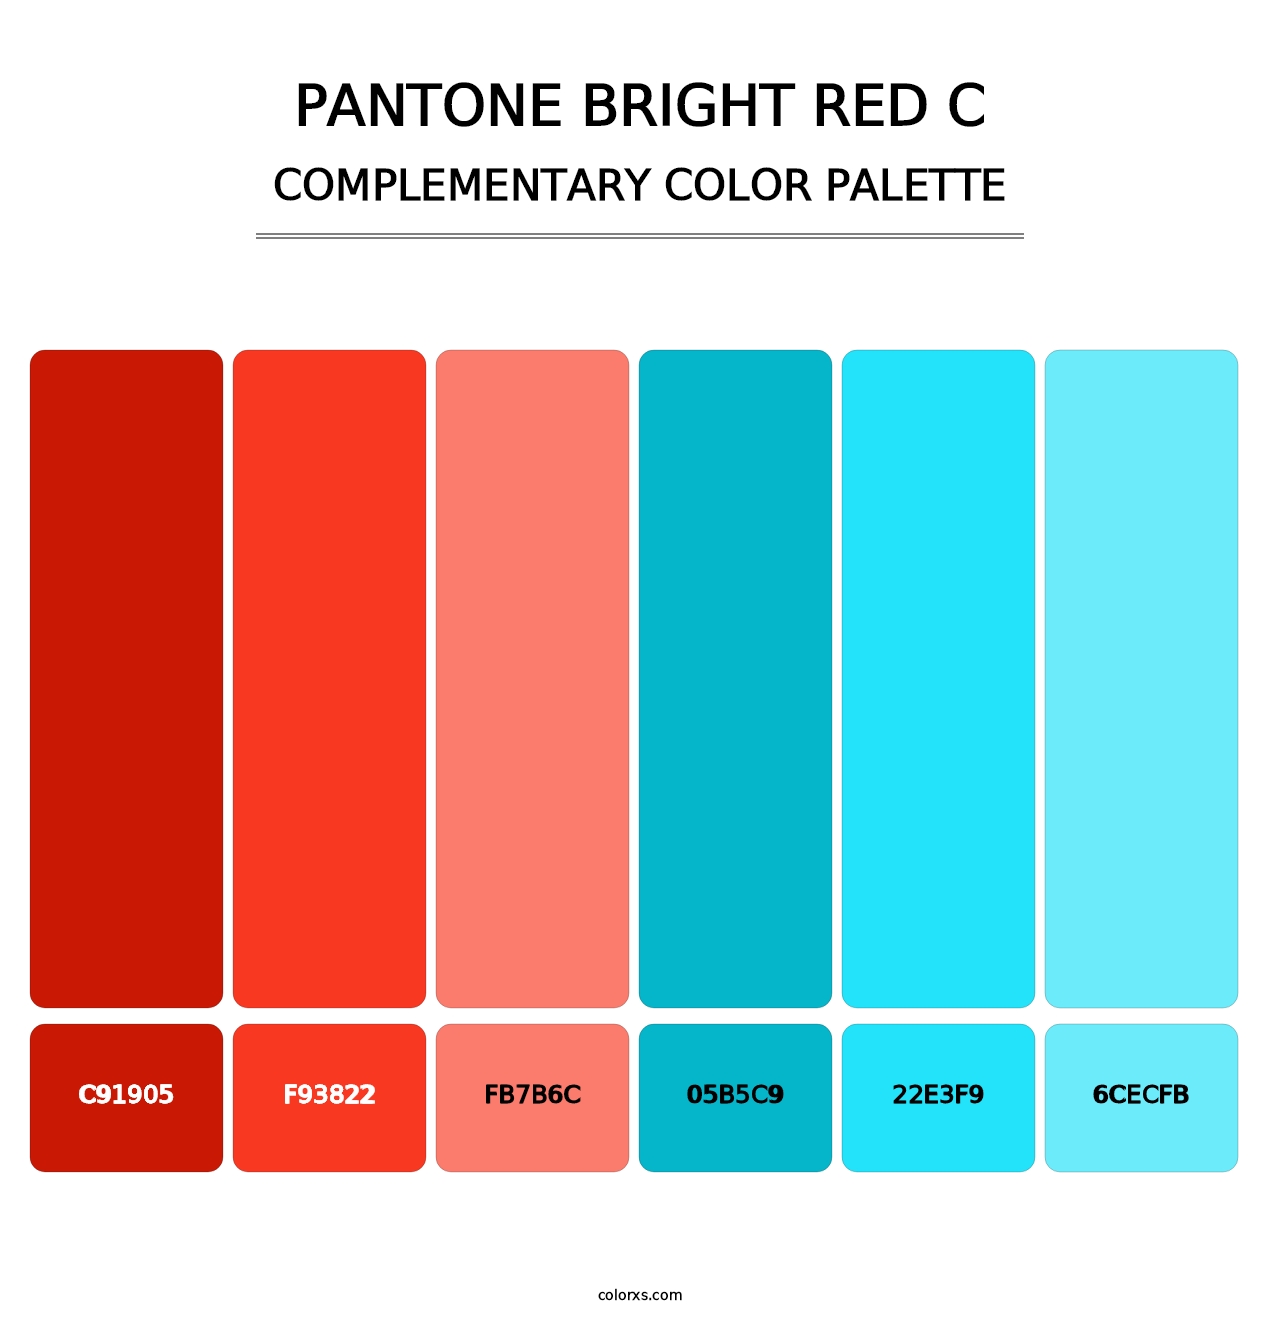 PANTONE Bright Red C - Complementary Color Palette